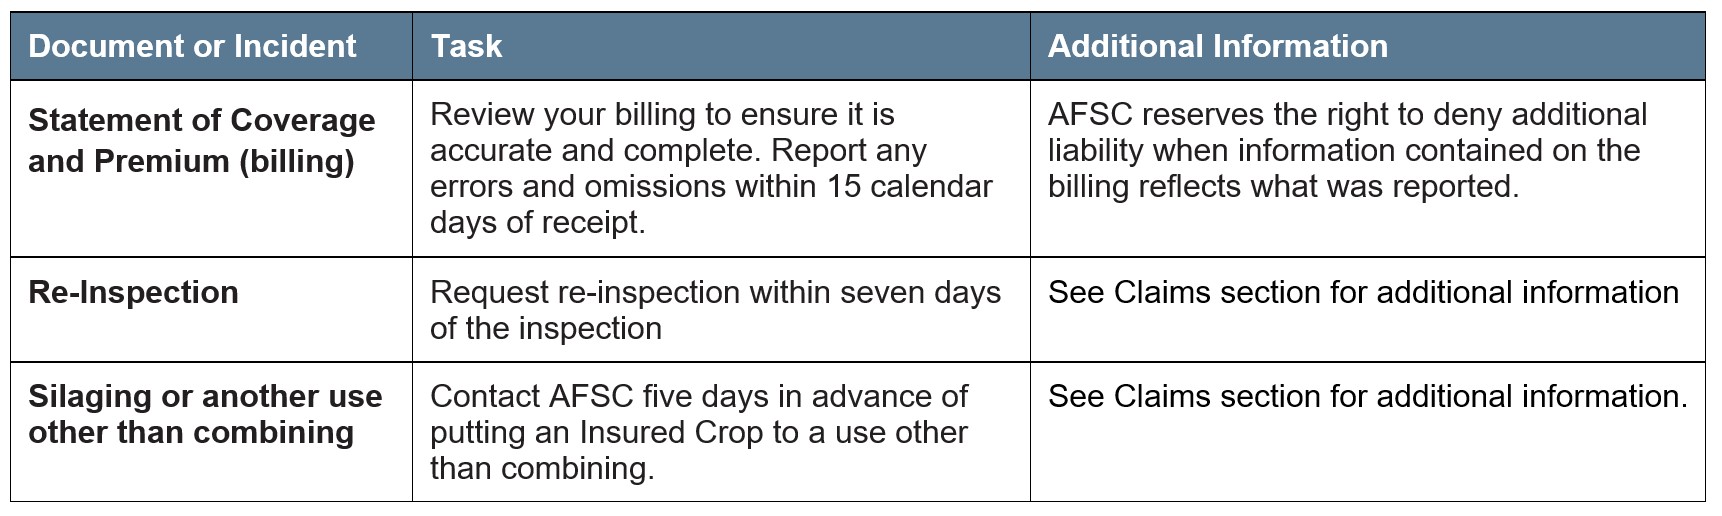 Pulse Article 4 Other Deadlines. Call AFSC for details